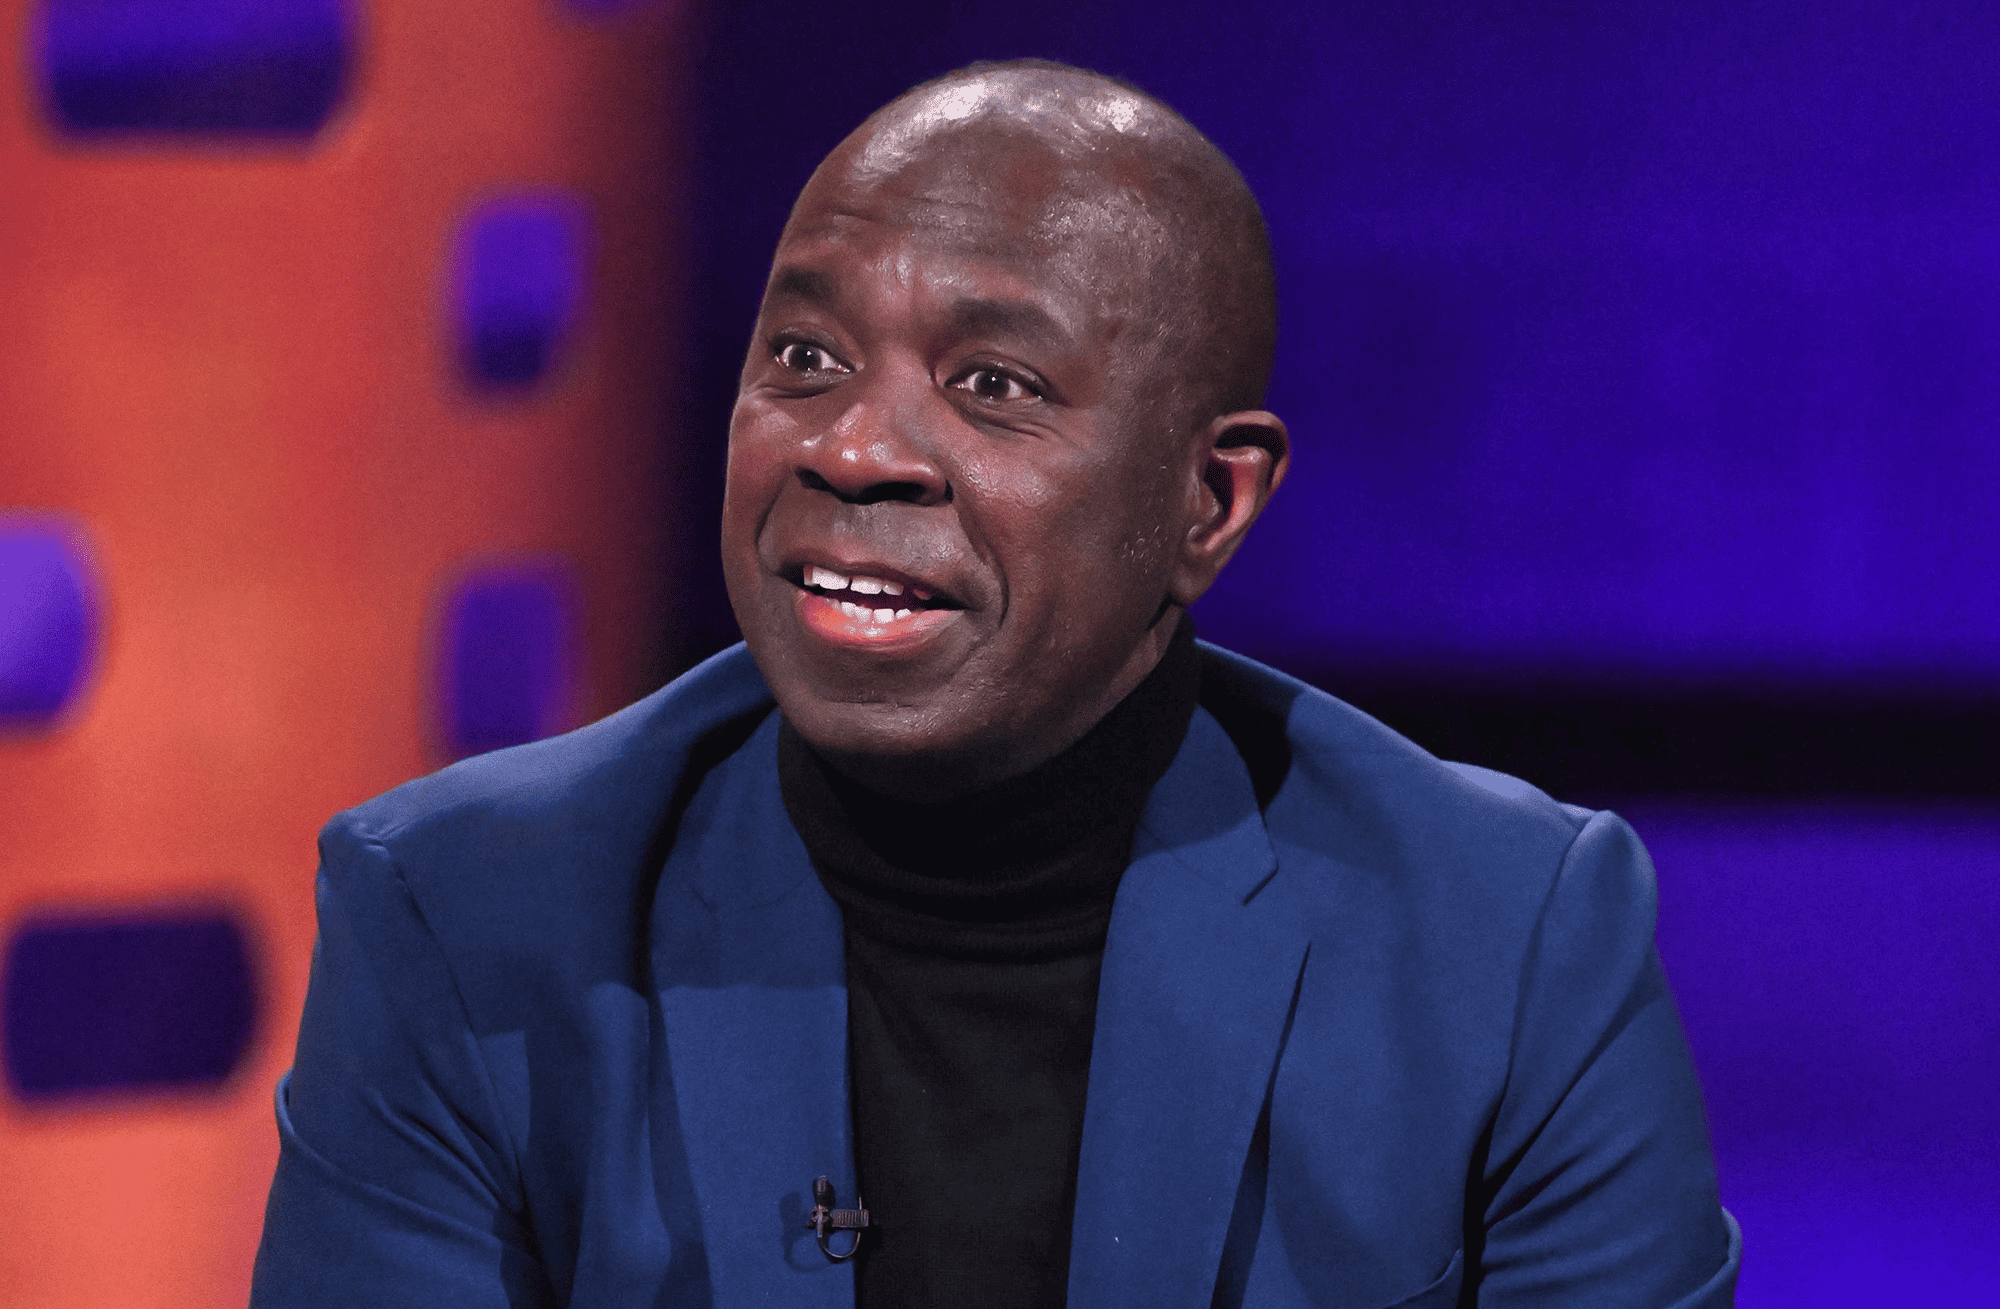 Clive Myrie ‘axed’ from BBC News after making Boris jokes